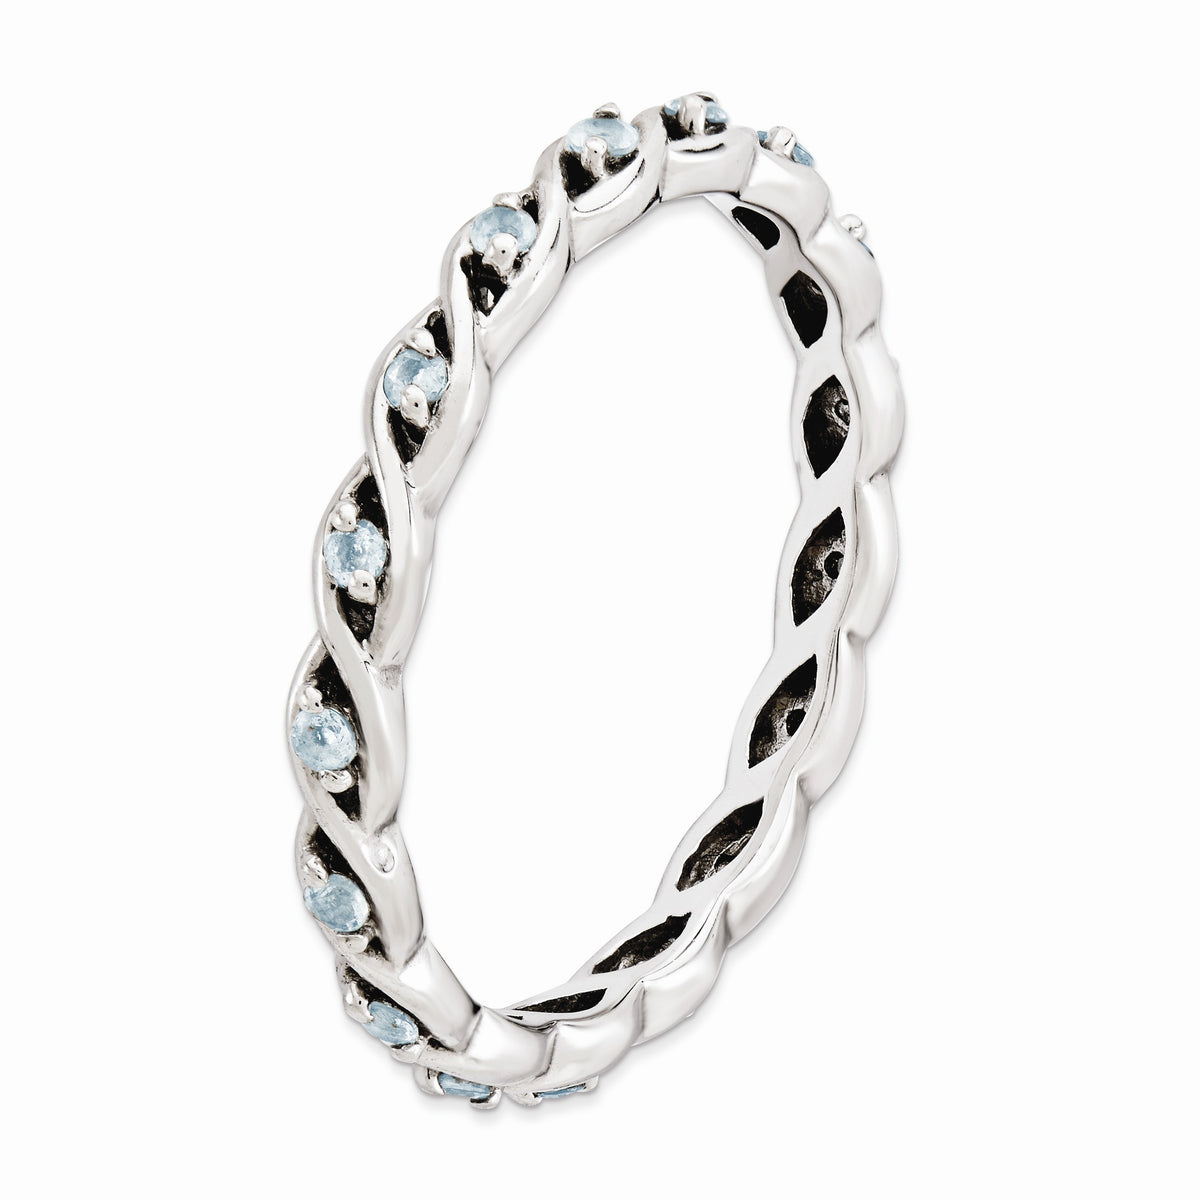 Alternate view of the 2.5mm Rhodium Plated Sterling Silver Stackable Aquamarine Twist Band by The Black Bow Jewelry Co.